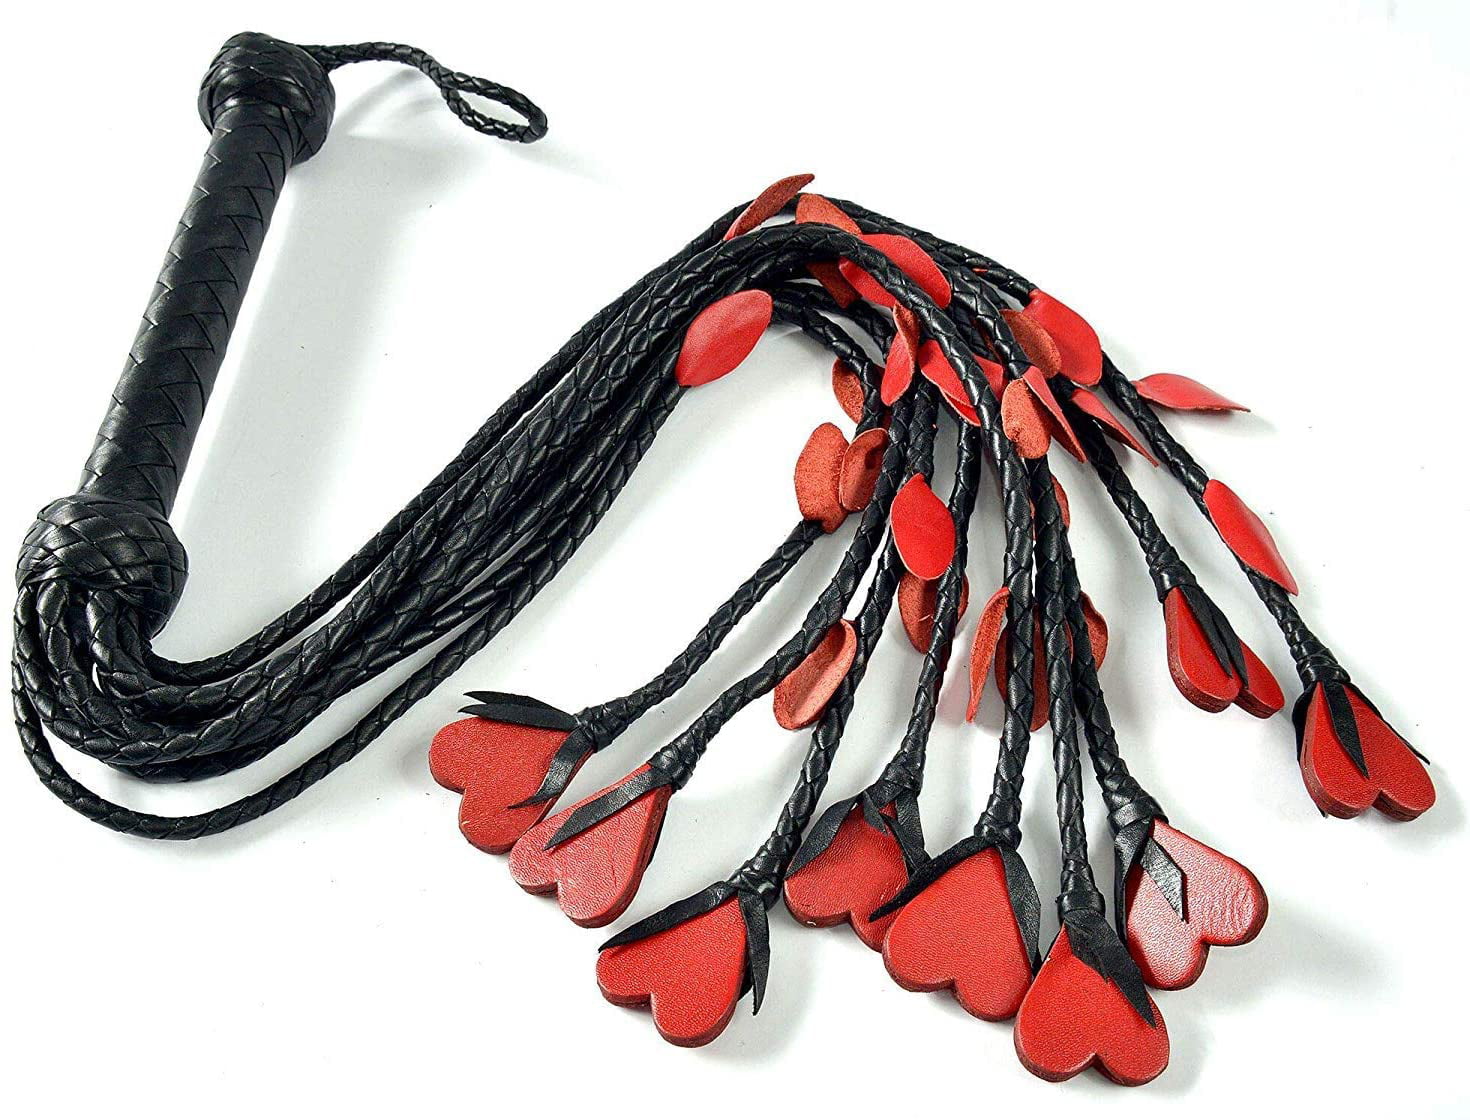 Premium Cat-O-Nine Tails Cowhide Leather Flogger with Sturdy 9 Knots Black Whip 